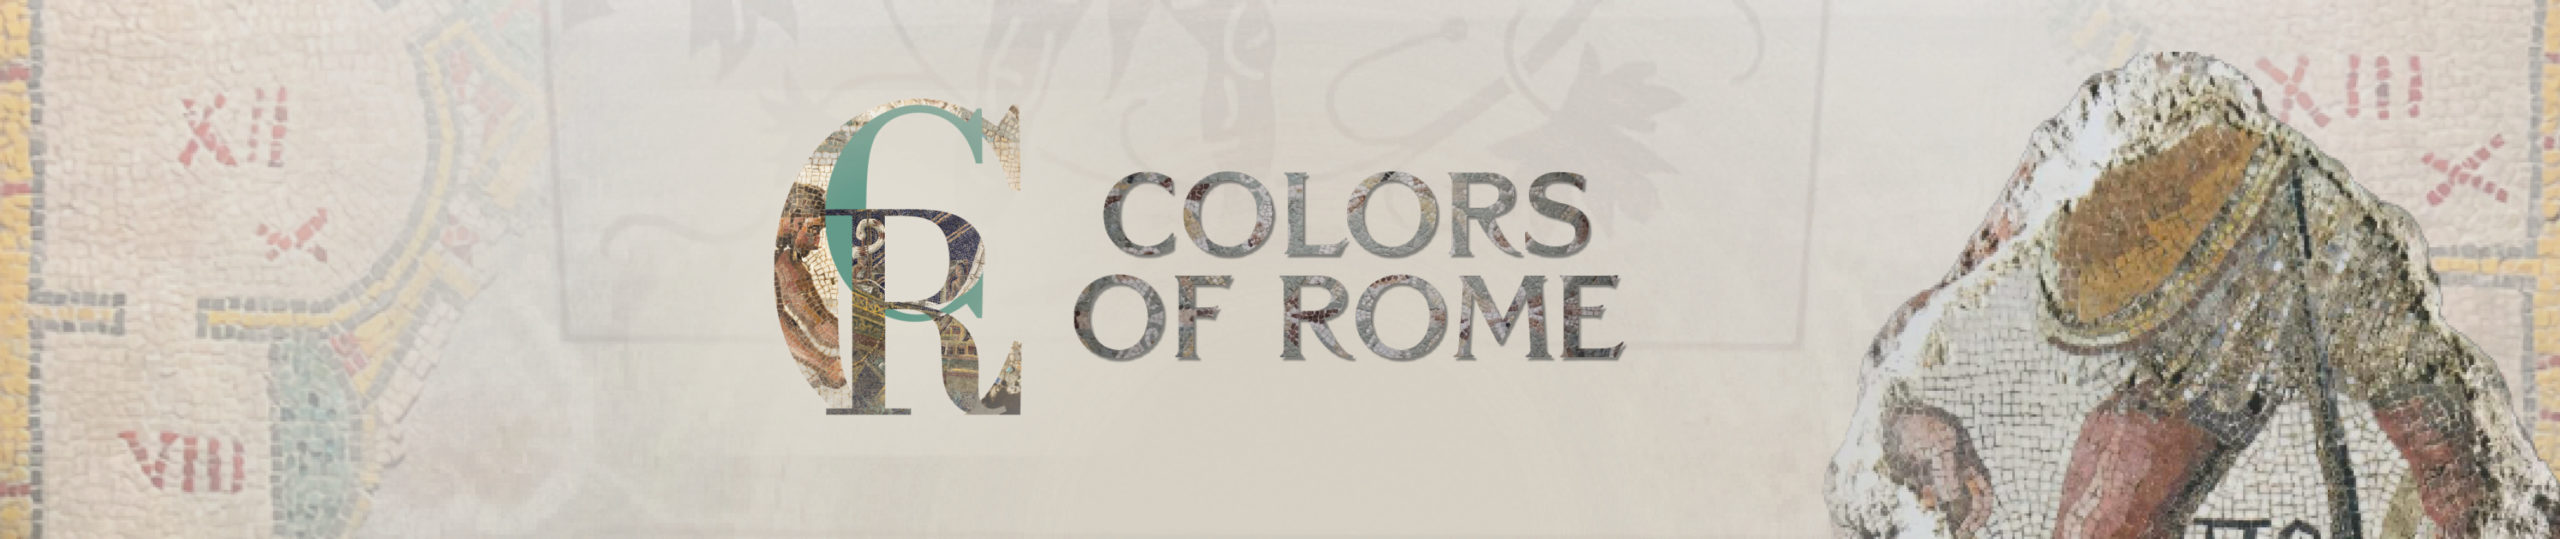 Colors of Rome